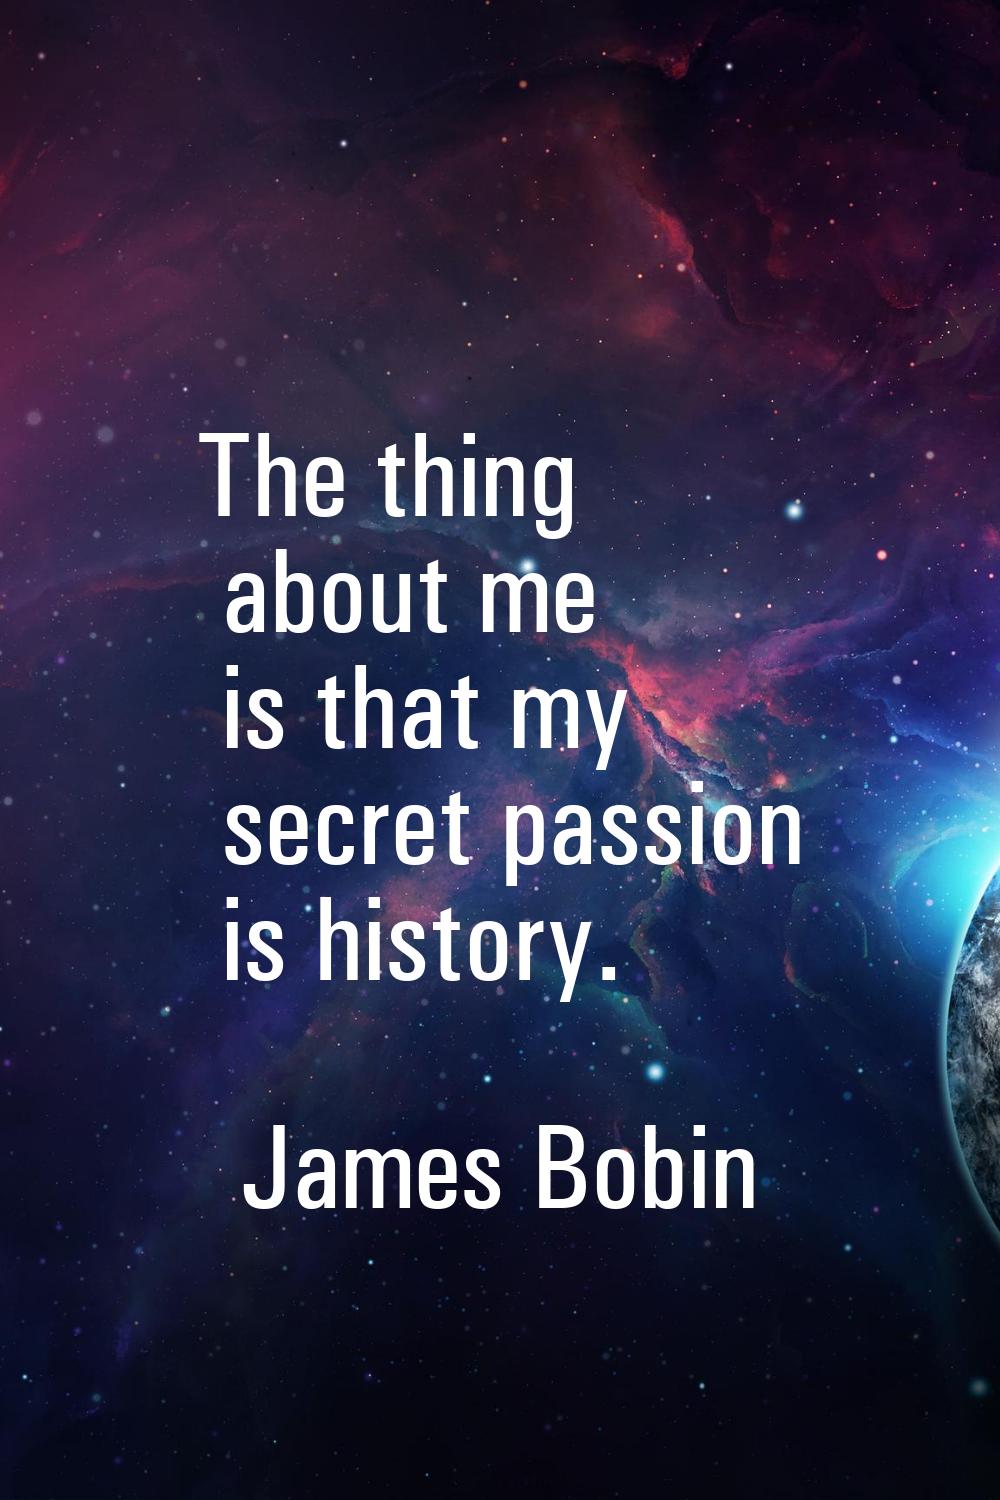 The thing about me is that my secret passion is history.